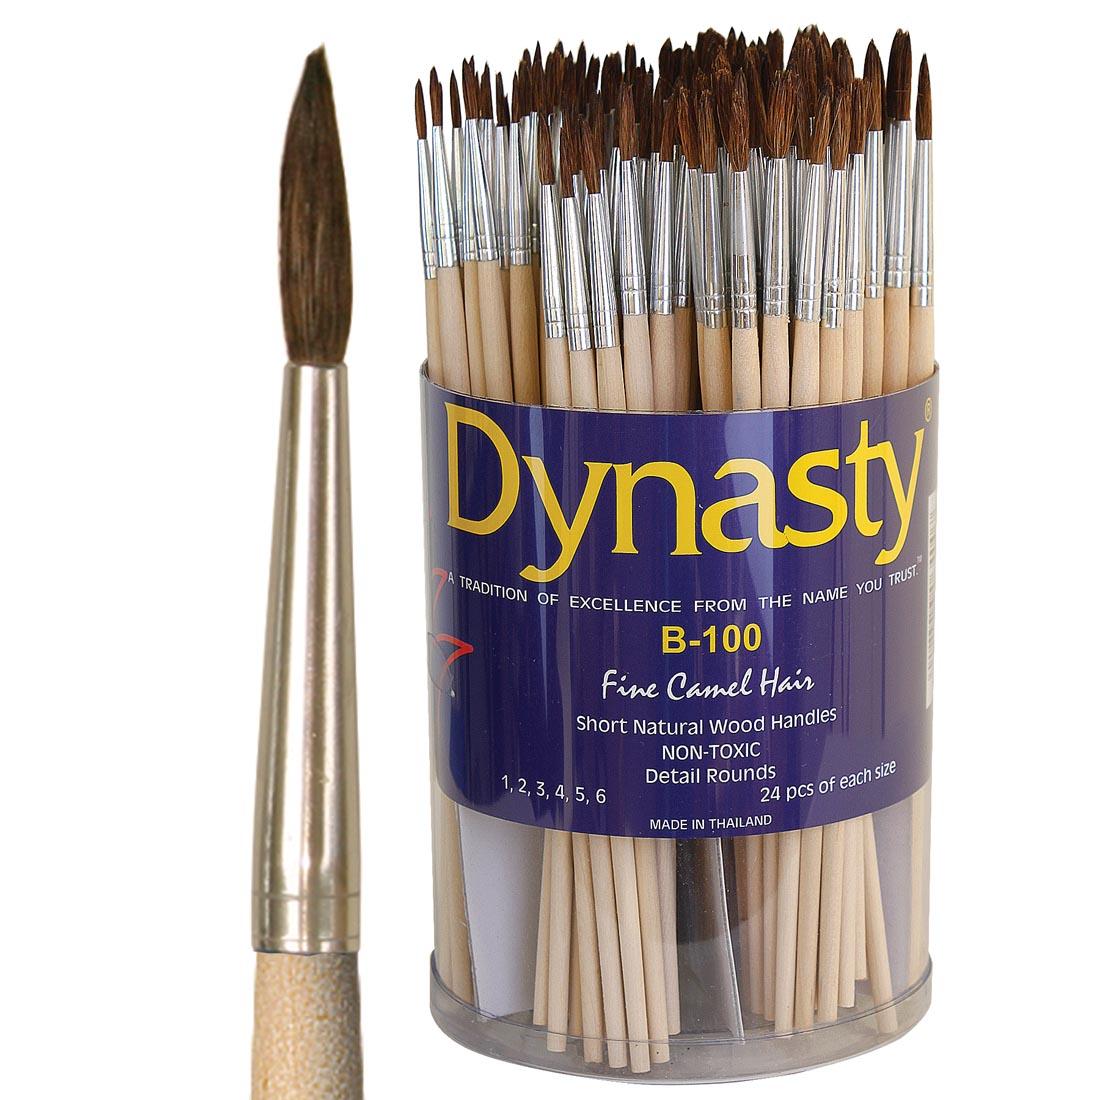 Dynasty Round Camel Brush Assortment in a Tub